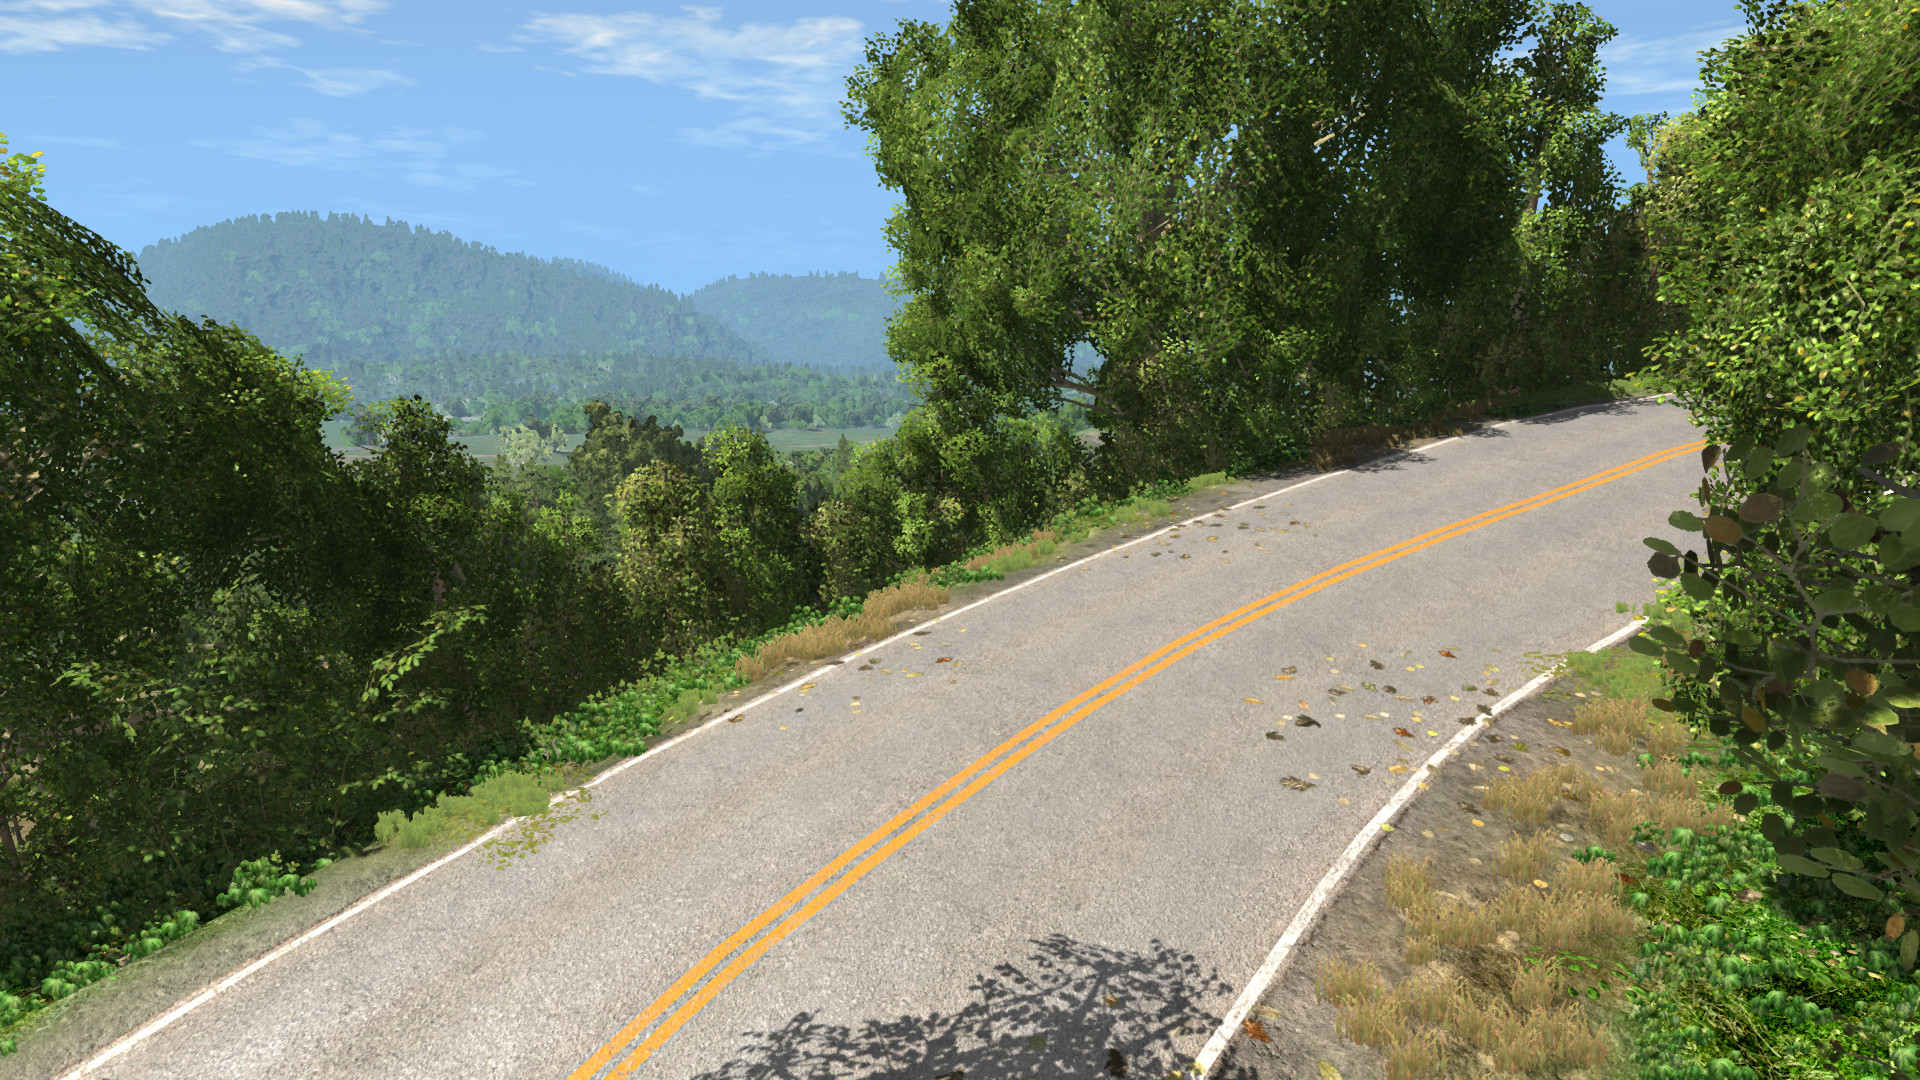 beamng drive steam